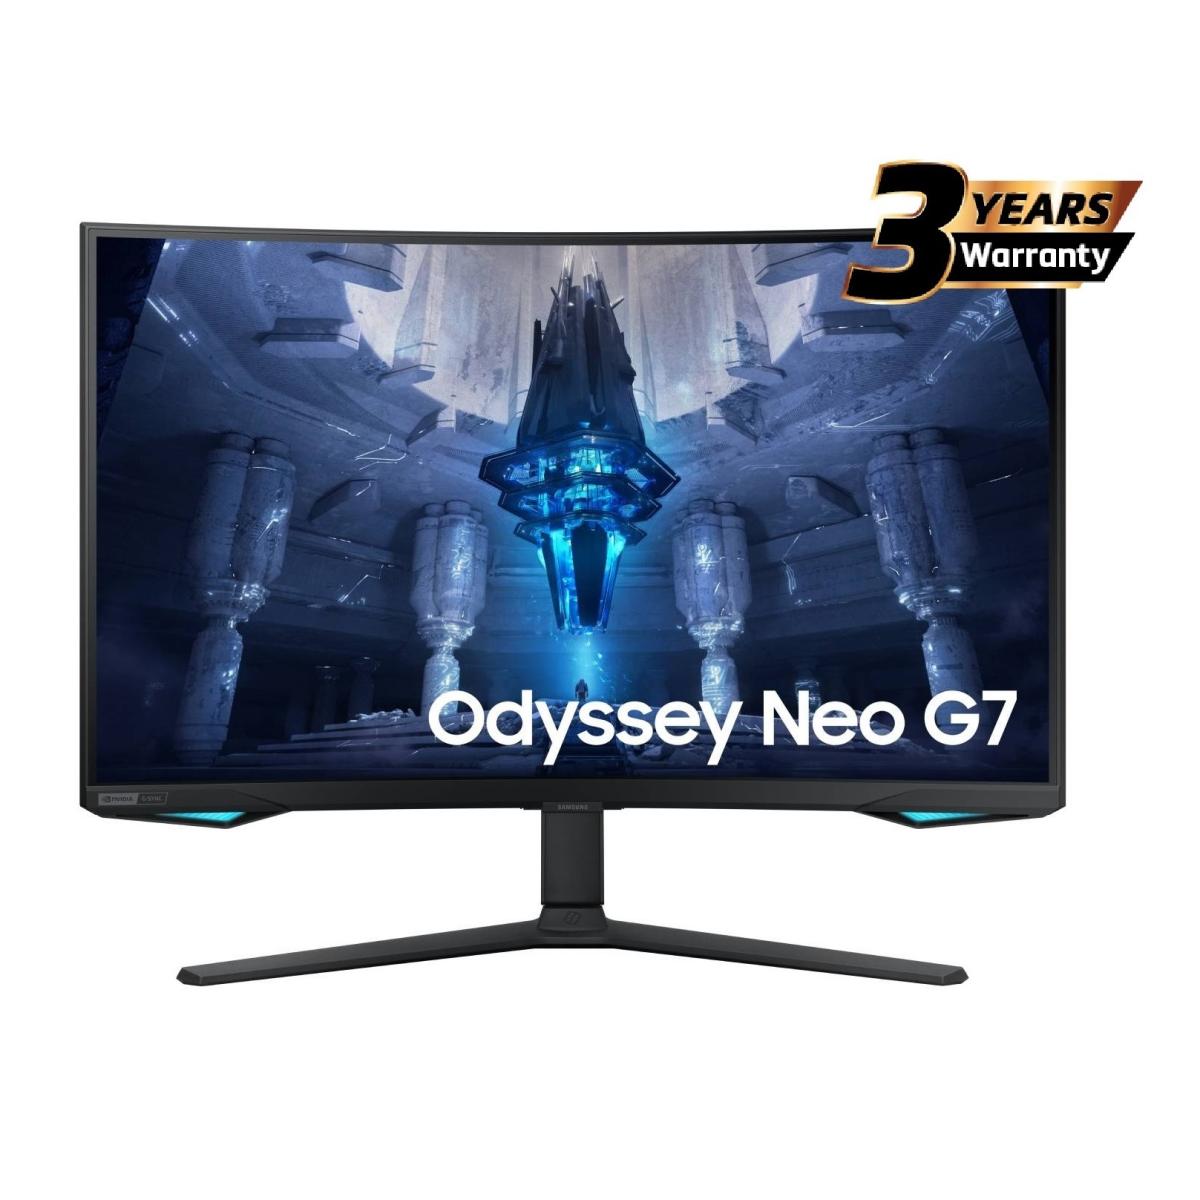 Samsung 32" Odyssey Neo G7 4K UHD 165Hz 1ms Quantum HDR2000 Curved Gaming Monitor